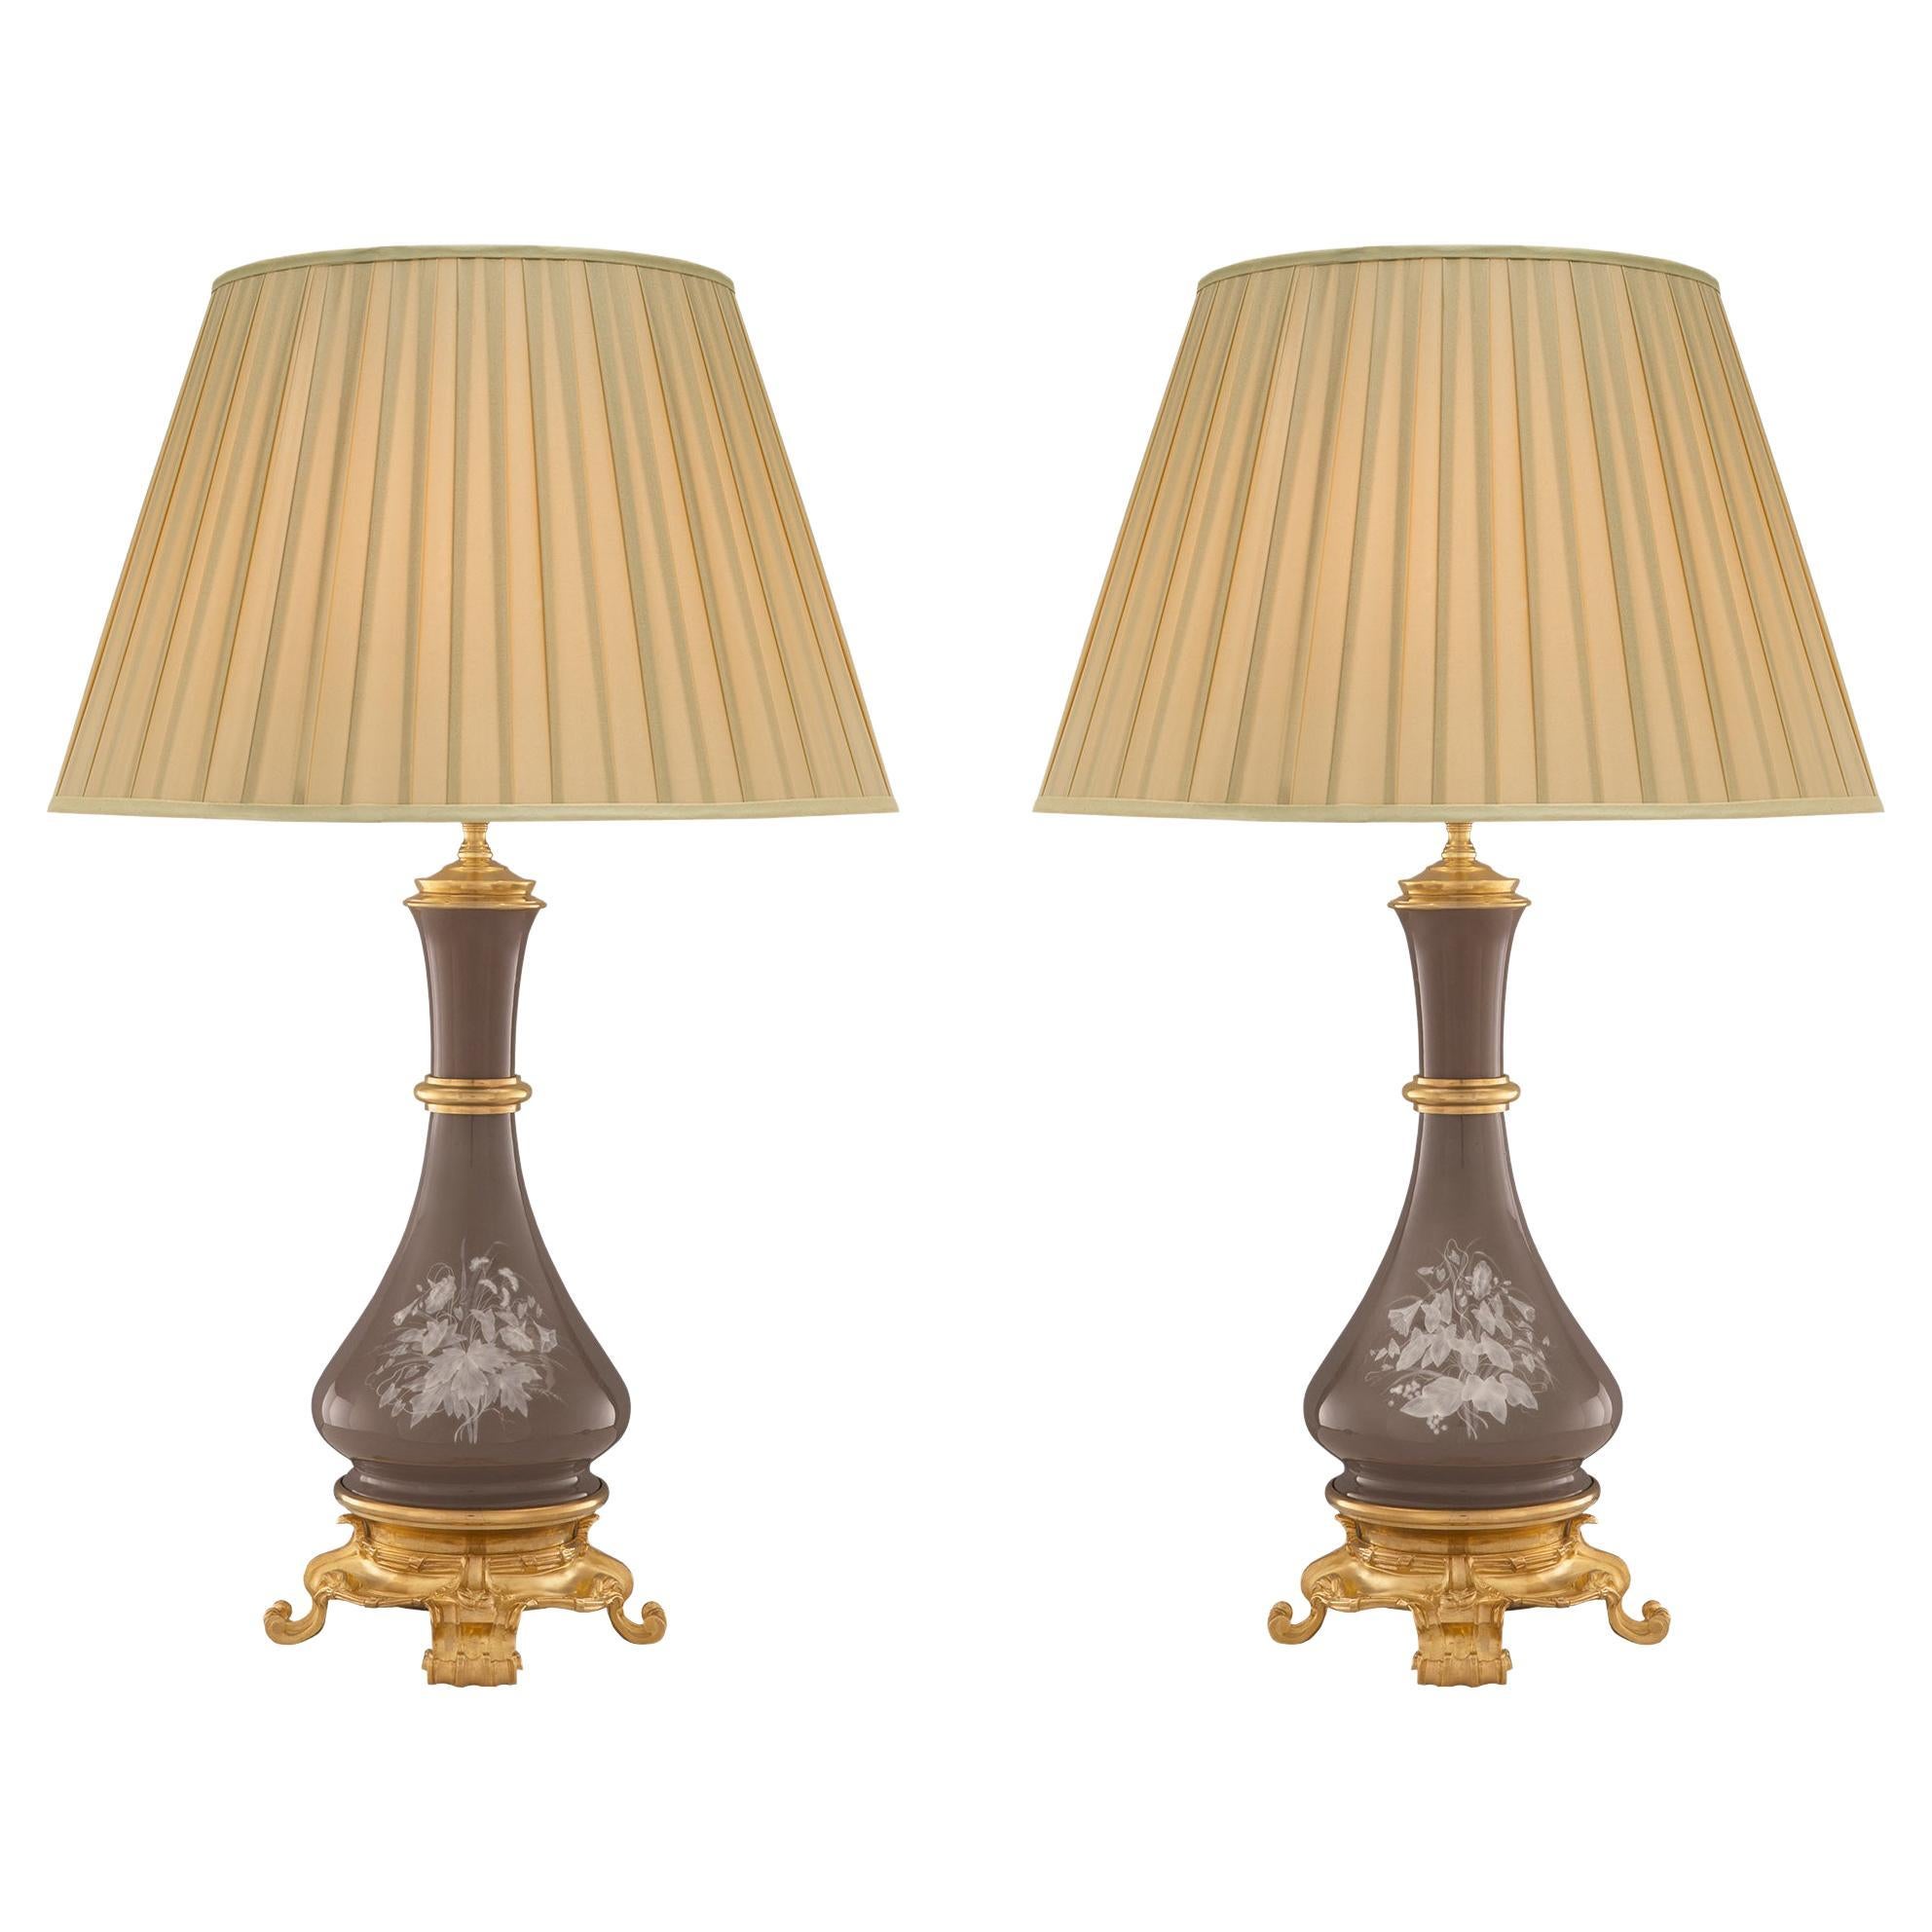 Pair of French 19th Century Louis XVI Style Porcelain and Ormolu Lamps